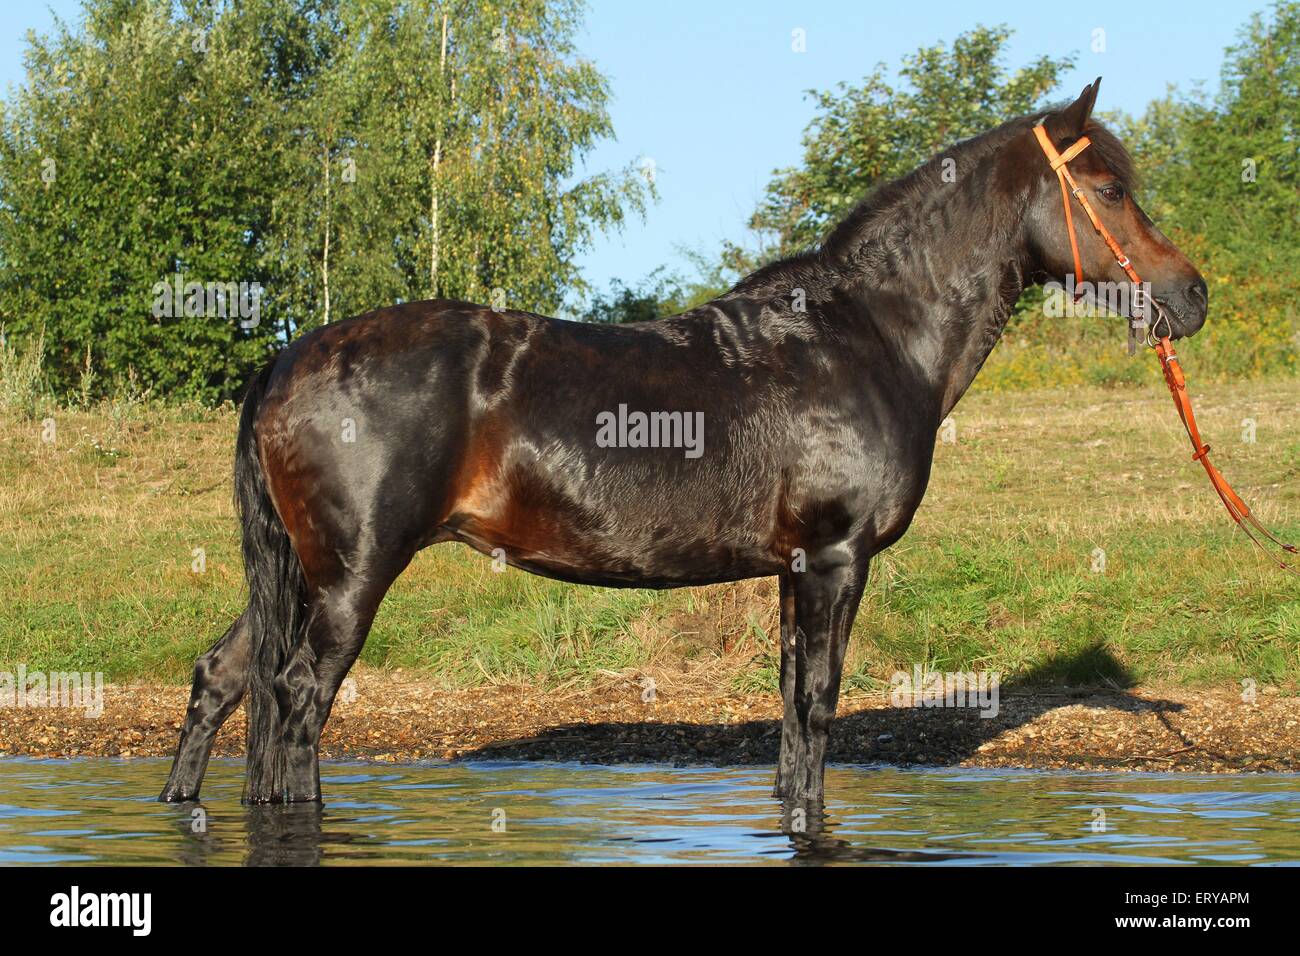 Pony in water Stock Photo